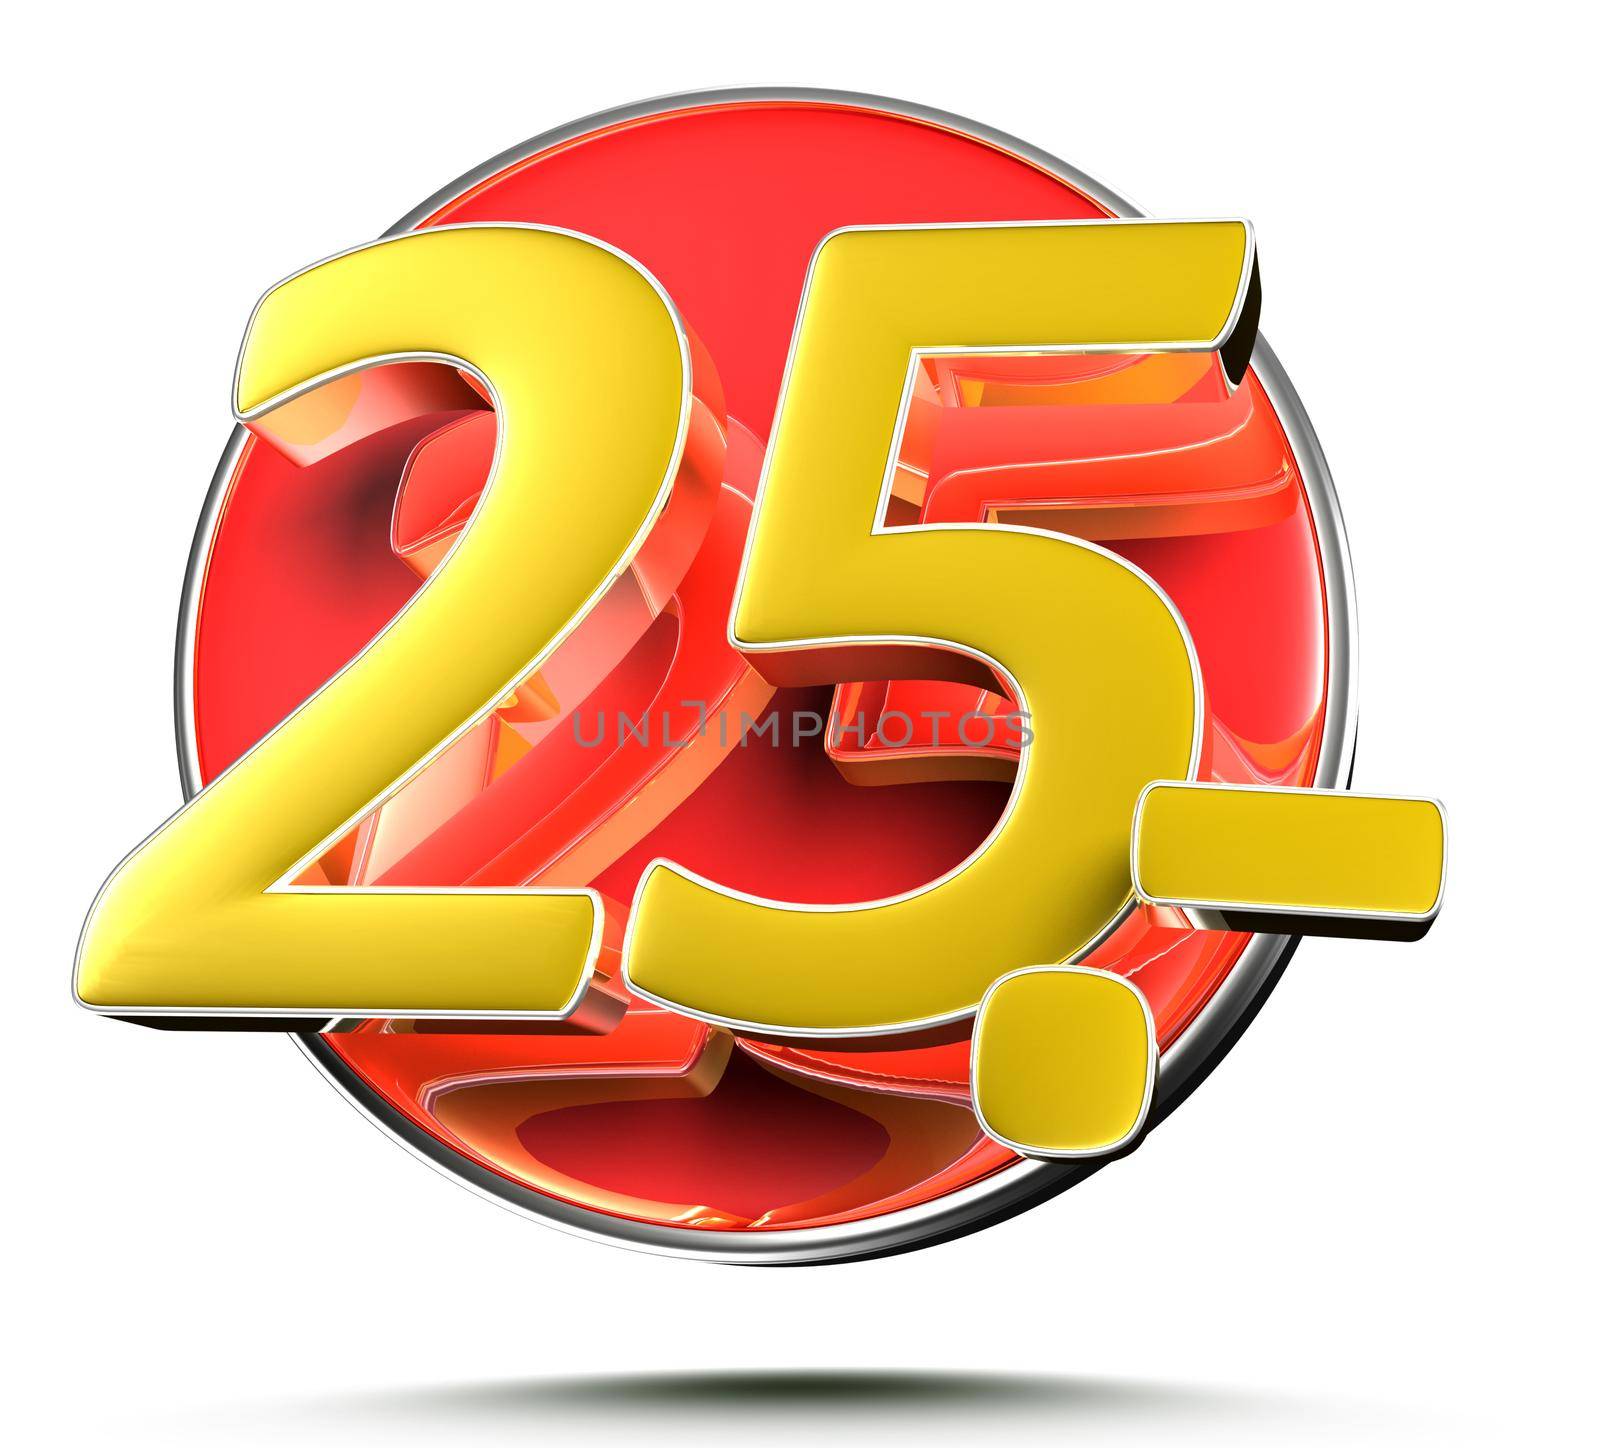 Number 25 price tag isolated on white background 3D illustration with clipping path.